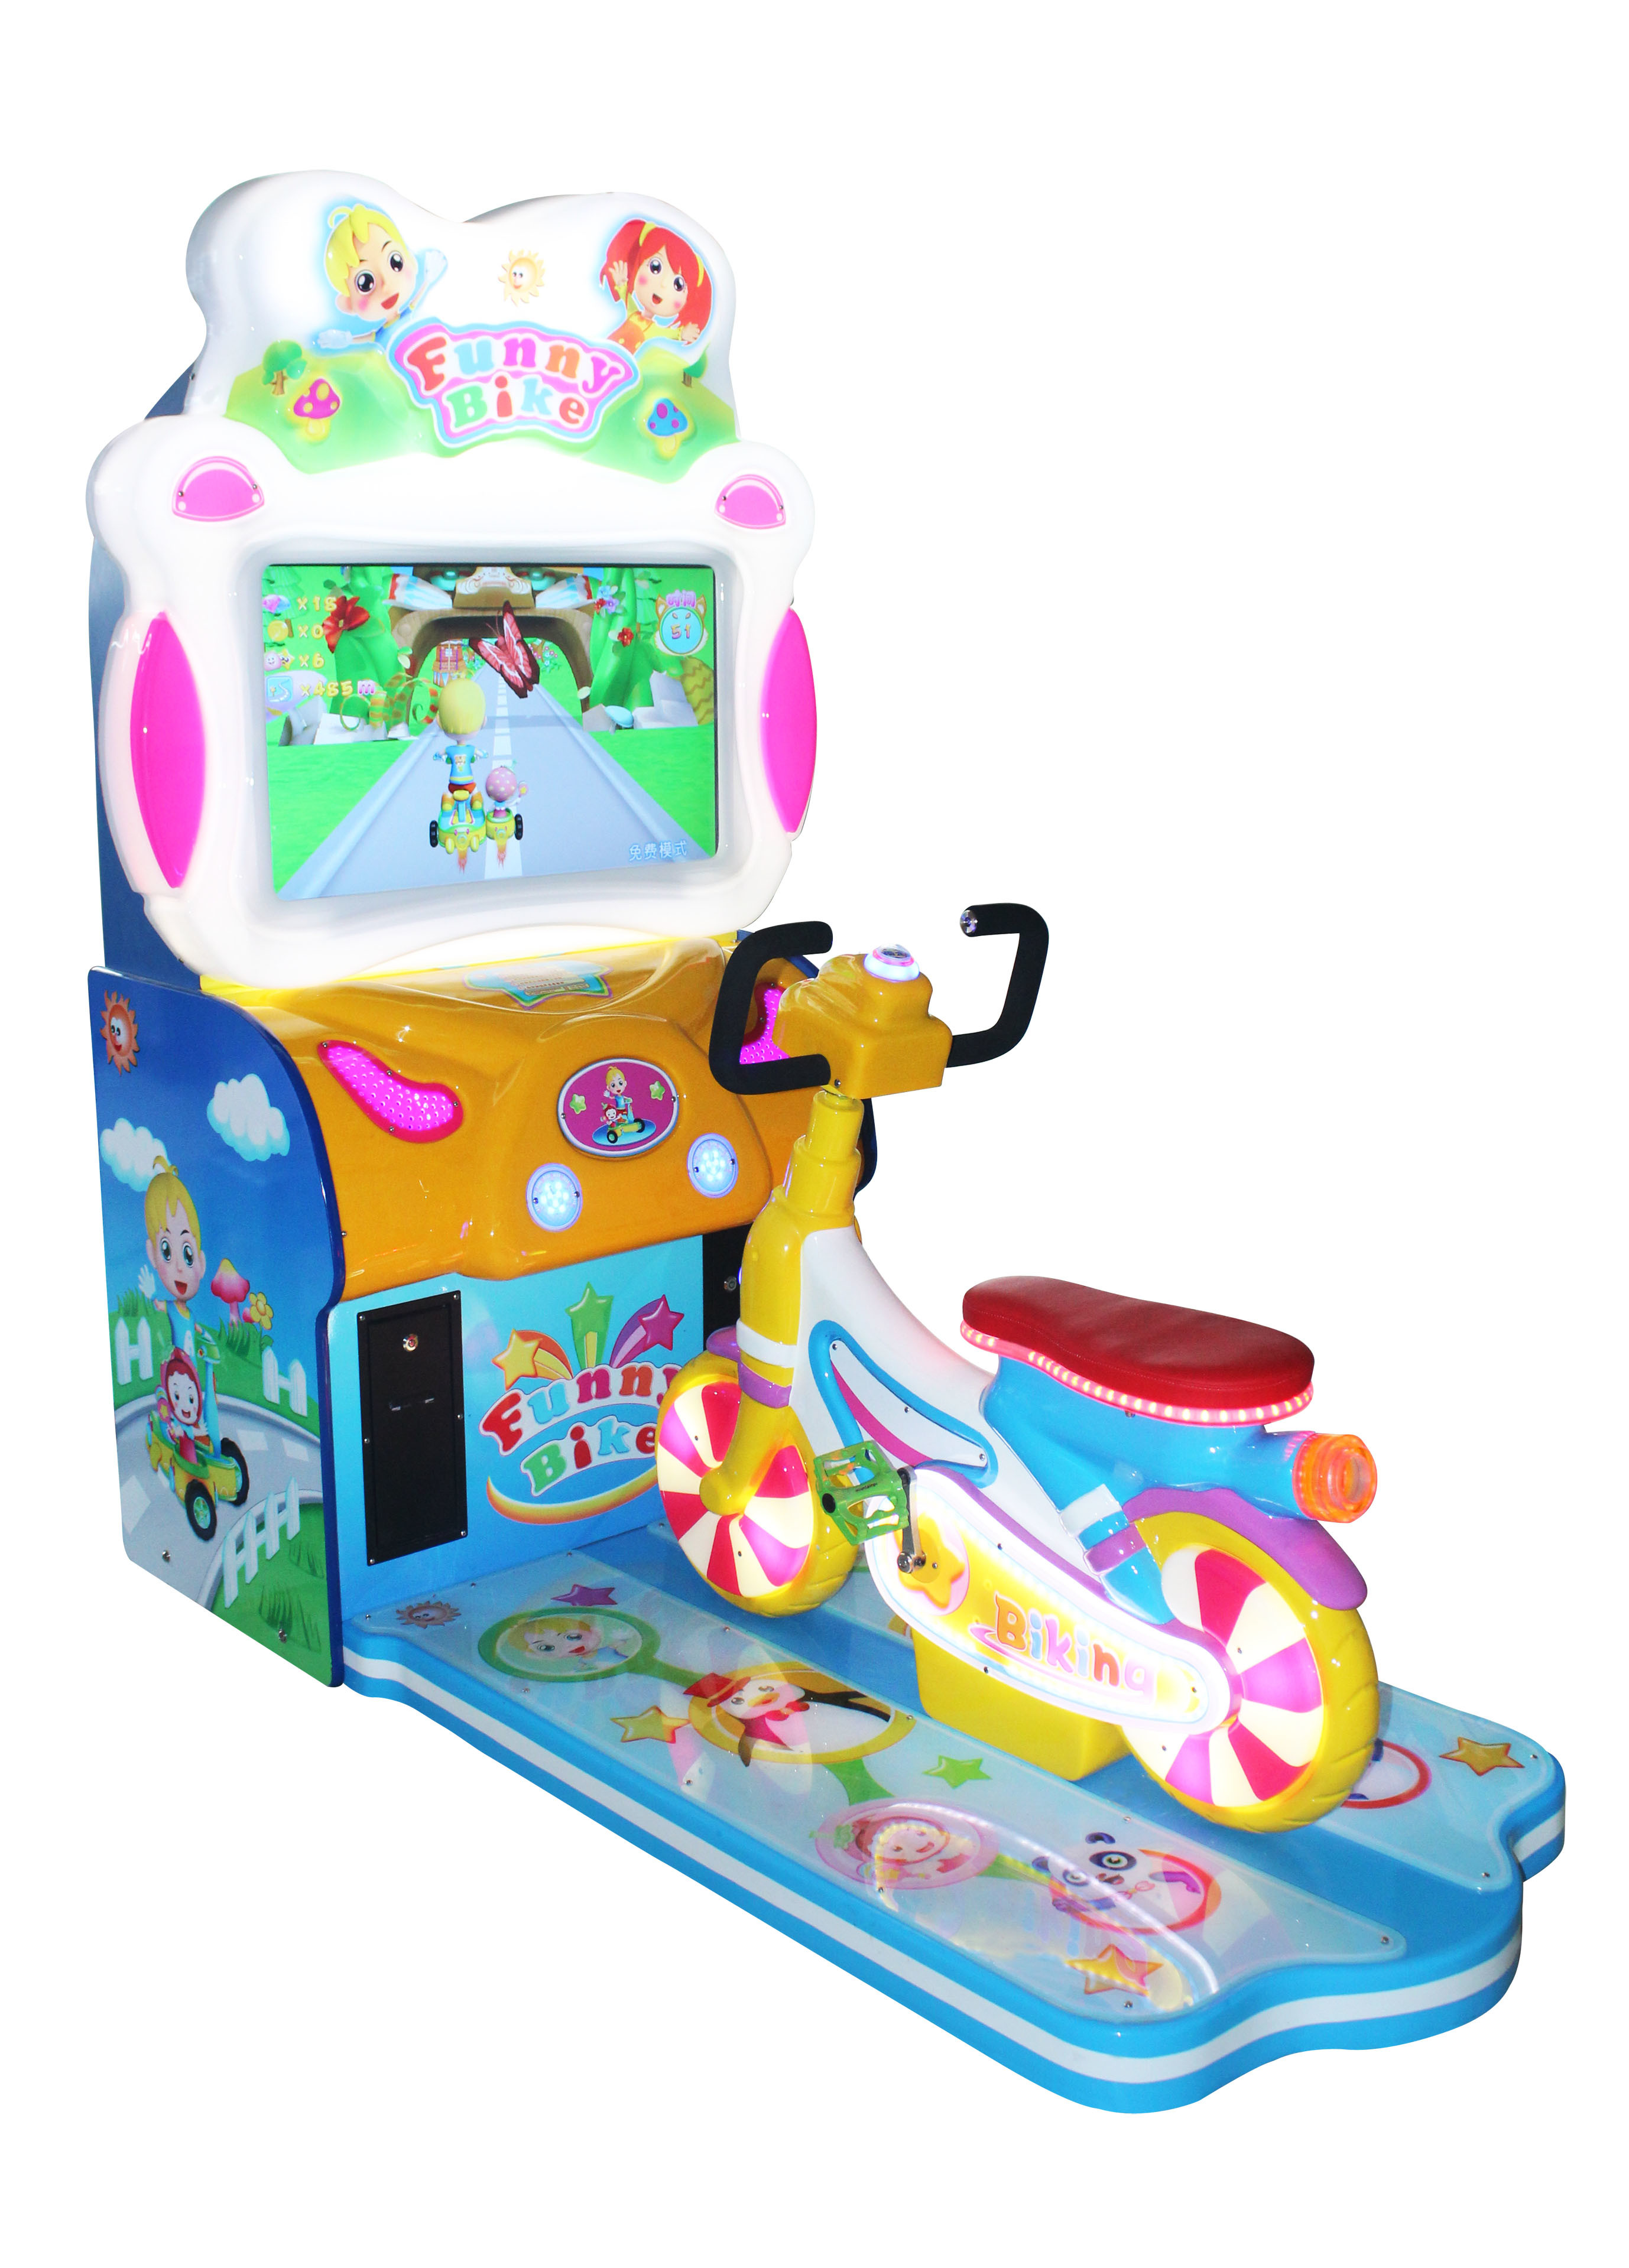 Cheap Bikecycle Kids Coin Operated Game Machine Colorful Ticket Redemption Game for sale